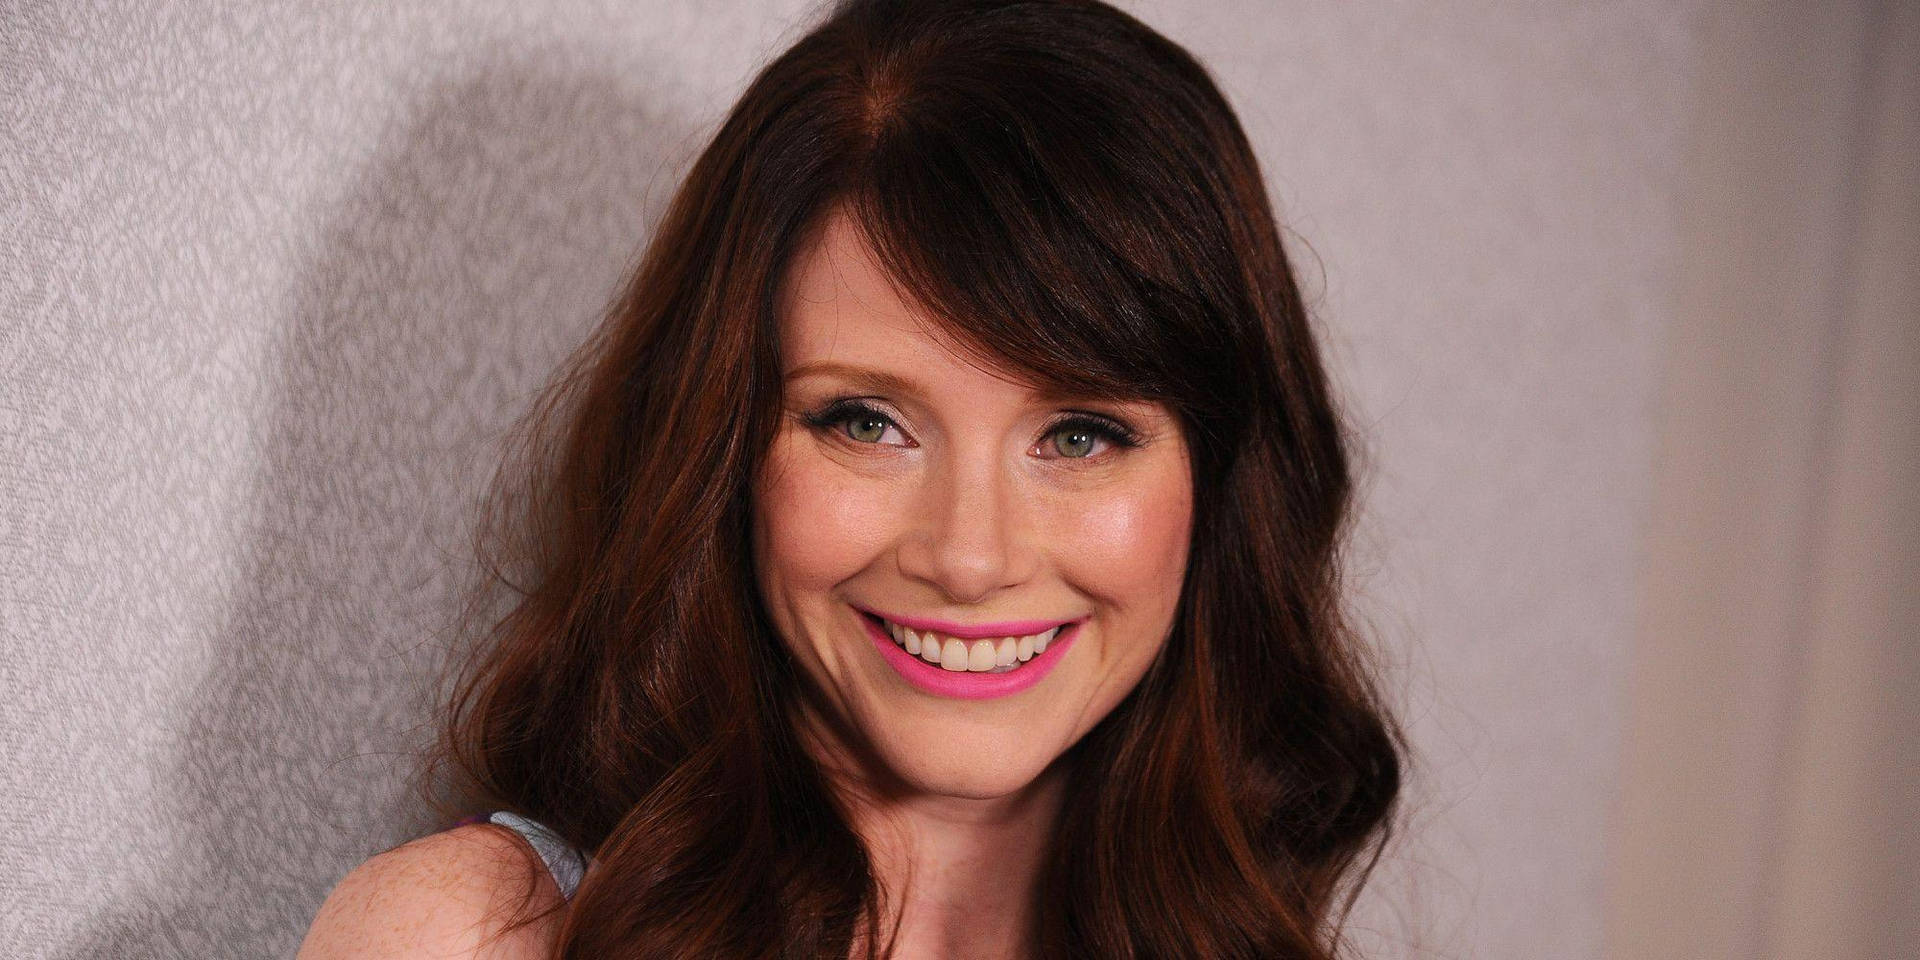 Bryce Dallas Howard Smiling On White Background Wallpaper